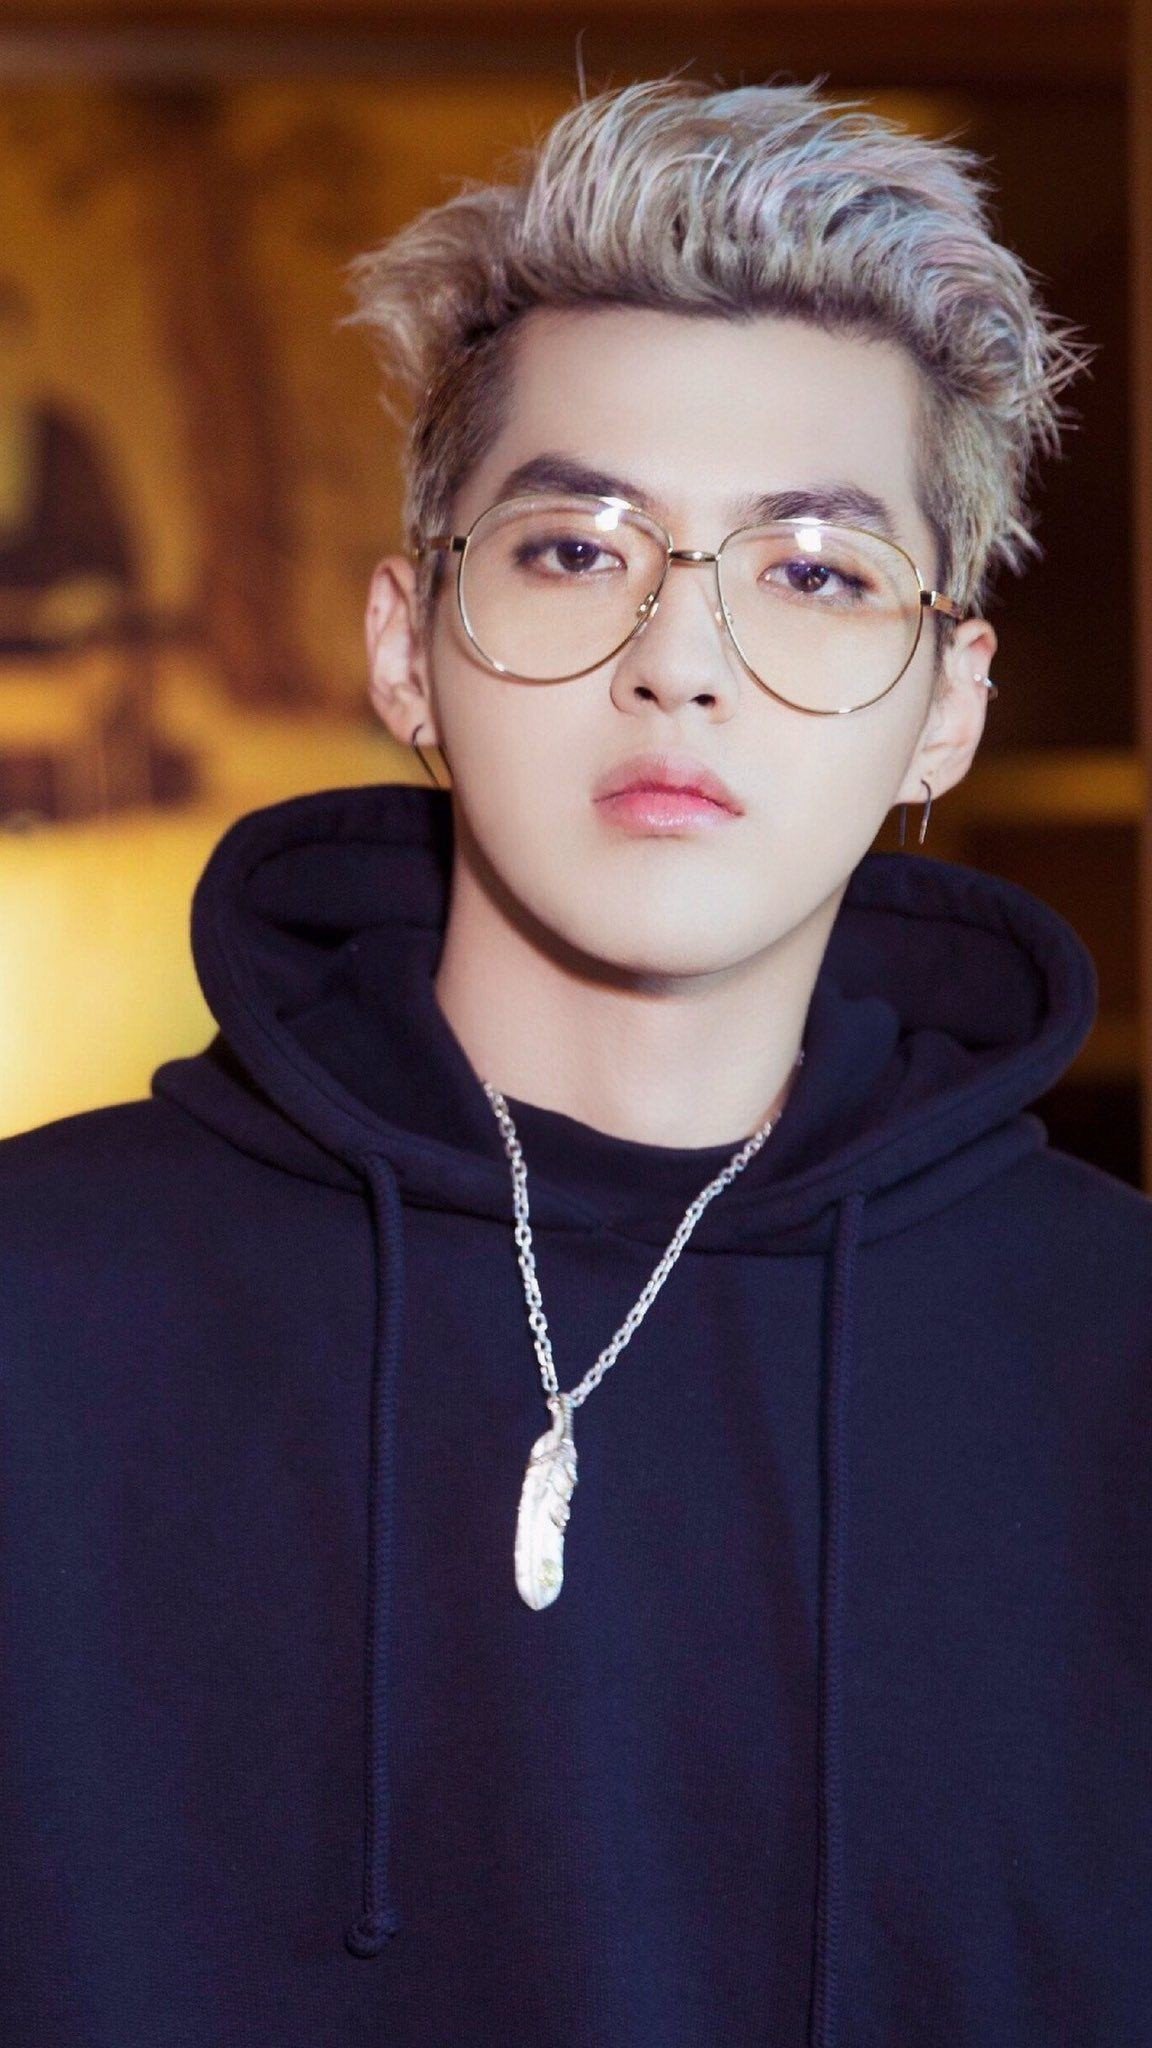 Chinese hip-hop star Kris Wu has been signed by Universal Music Group.